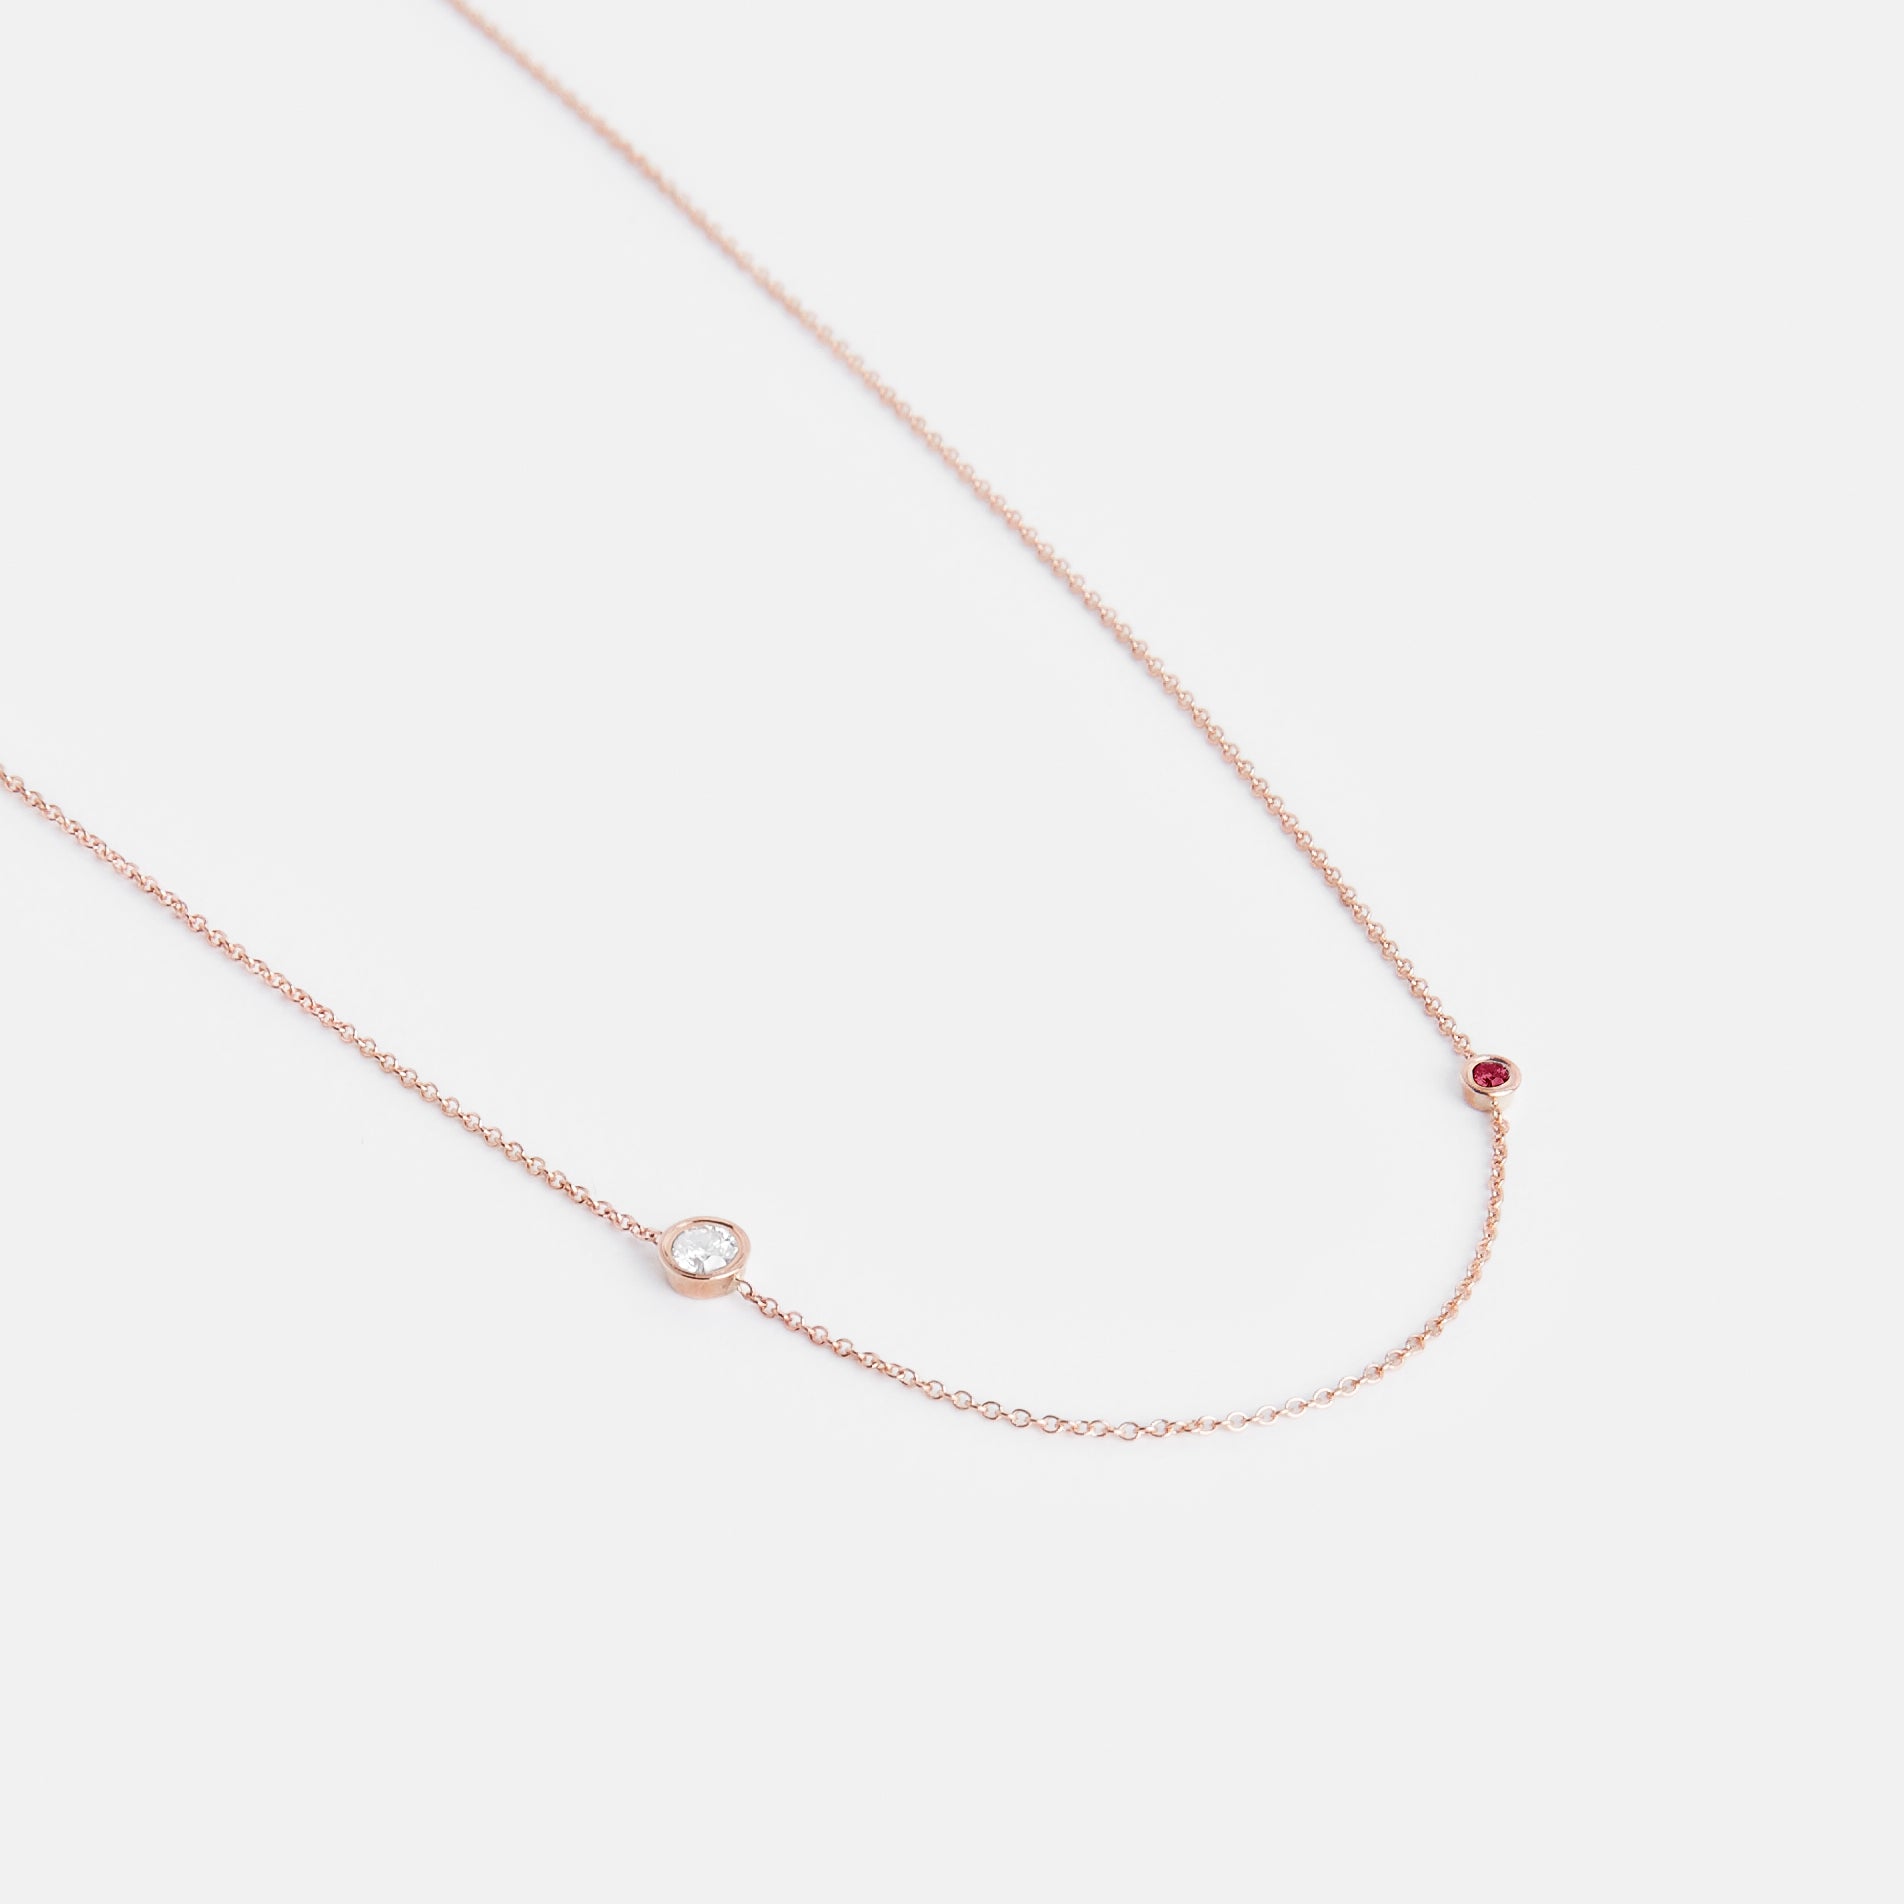 Iba Designer Necklace in 14k Rose Gold set Ruby and White Diamonds By SHW Fine Jewelry NYC